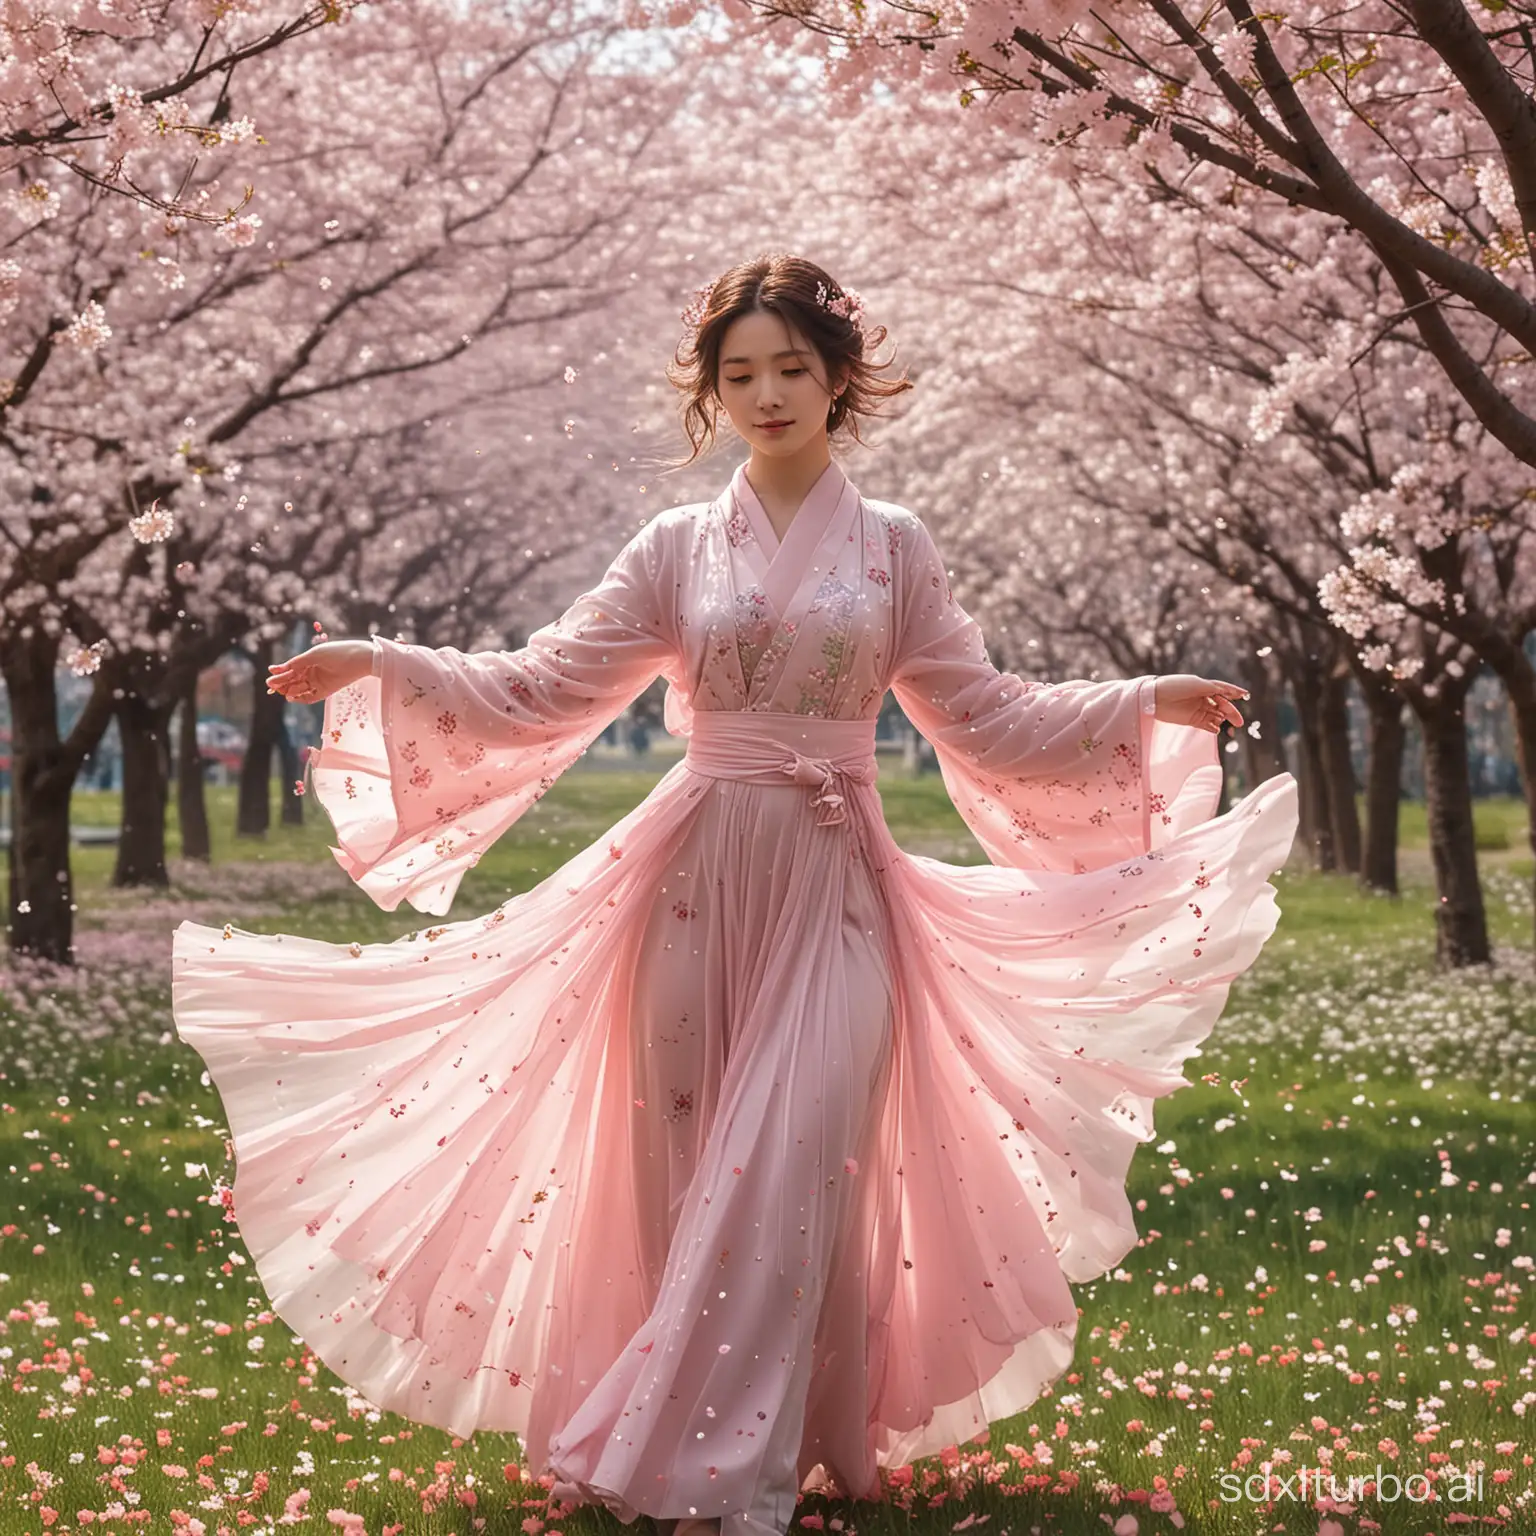 Amidst a stunning spring panorama, an anime enchantress commands attention. Cloaked in an alluring outfit that flutters with the breeze, she stands in a meadow surrounded by cherry blossom trees. As the wind whispers through the blossoms, a cascade of pink petals takes flight, creating a swirling dance around her. The air is alive with the delicate confetti of cherry blossom leaves, casting a dreamlike spell over the scene. The enchanting girl moves gracefully through this ephemeral storm, her presence and the fluttering petals intertwining in a mesmerizing ballet. It's a spectacle of sensuality and nature, a symphony where beauty and cherry blossoms collide
<lora:add_detail:1>